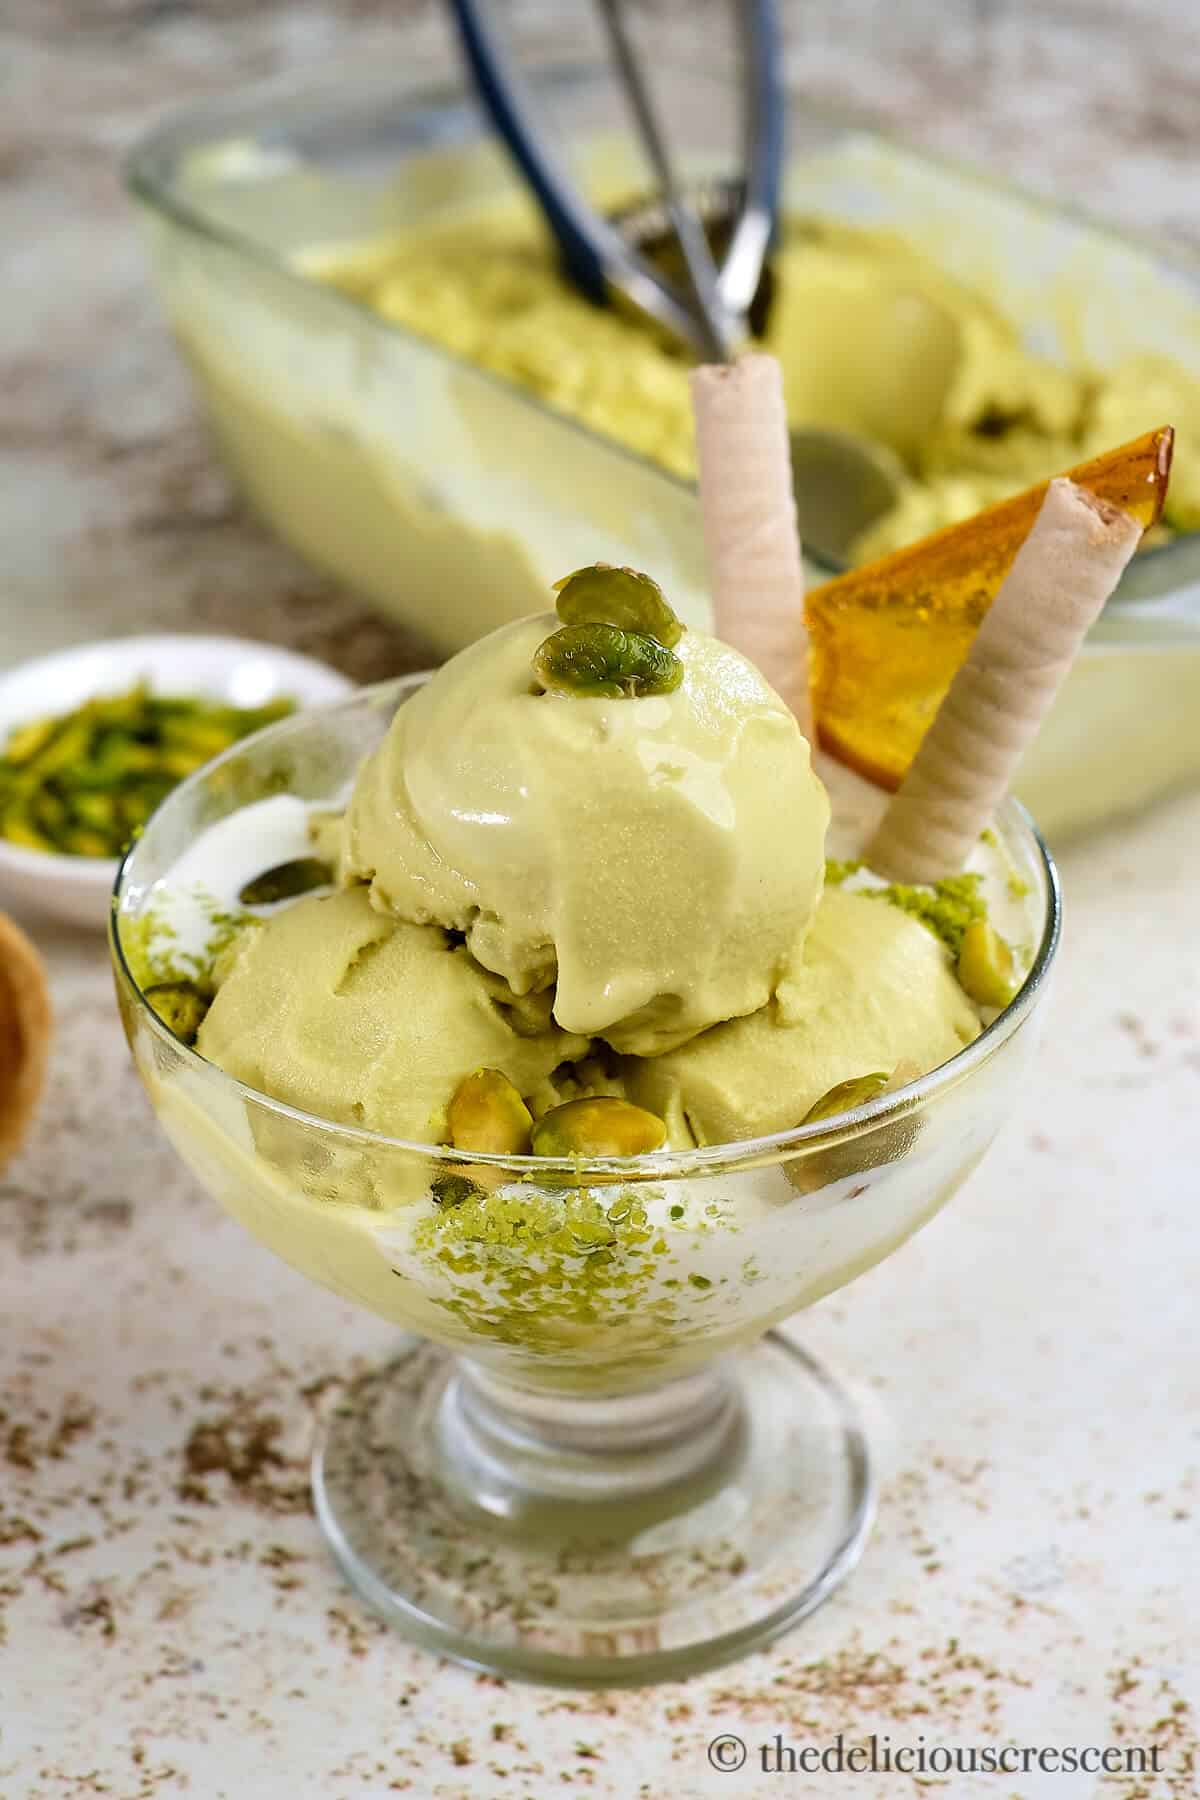 Scoops of Italian style pistachio ice cream in a glass cup.